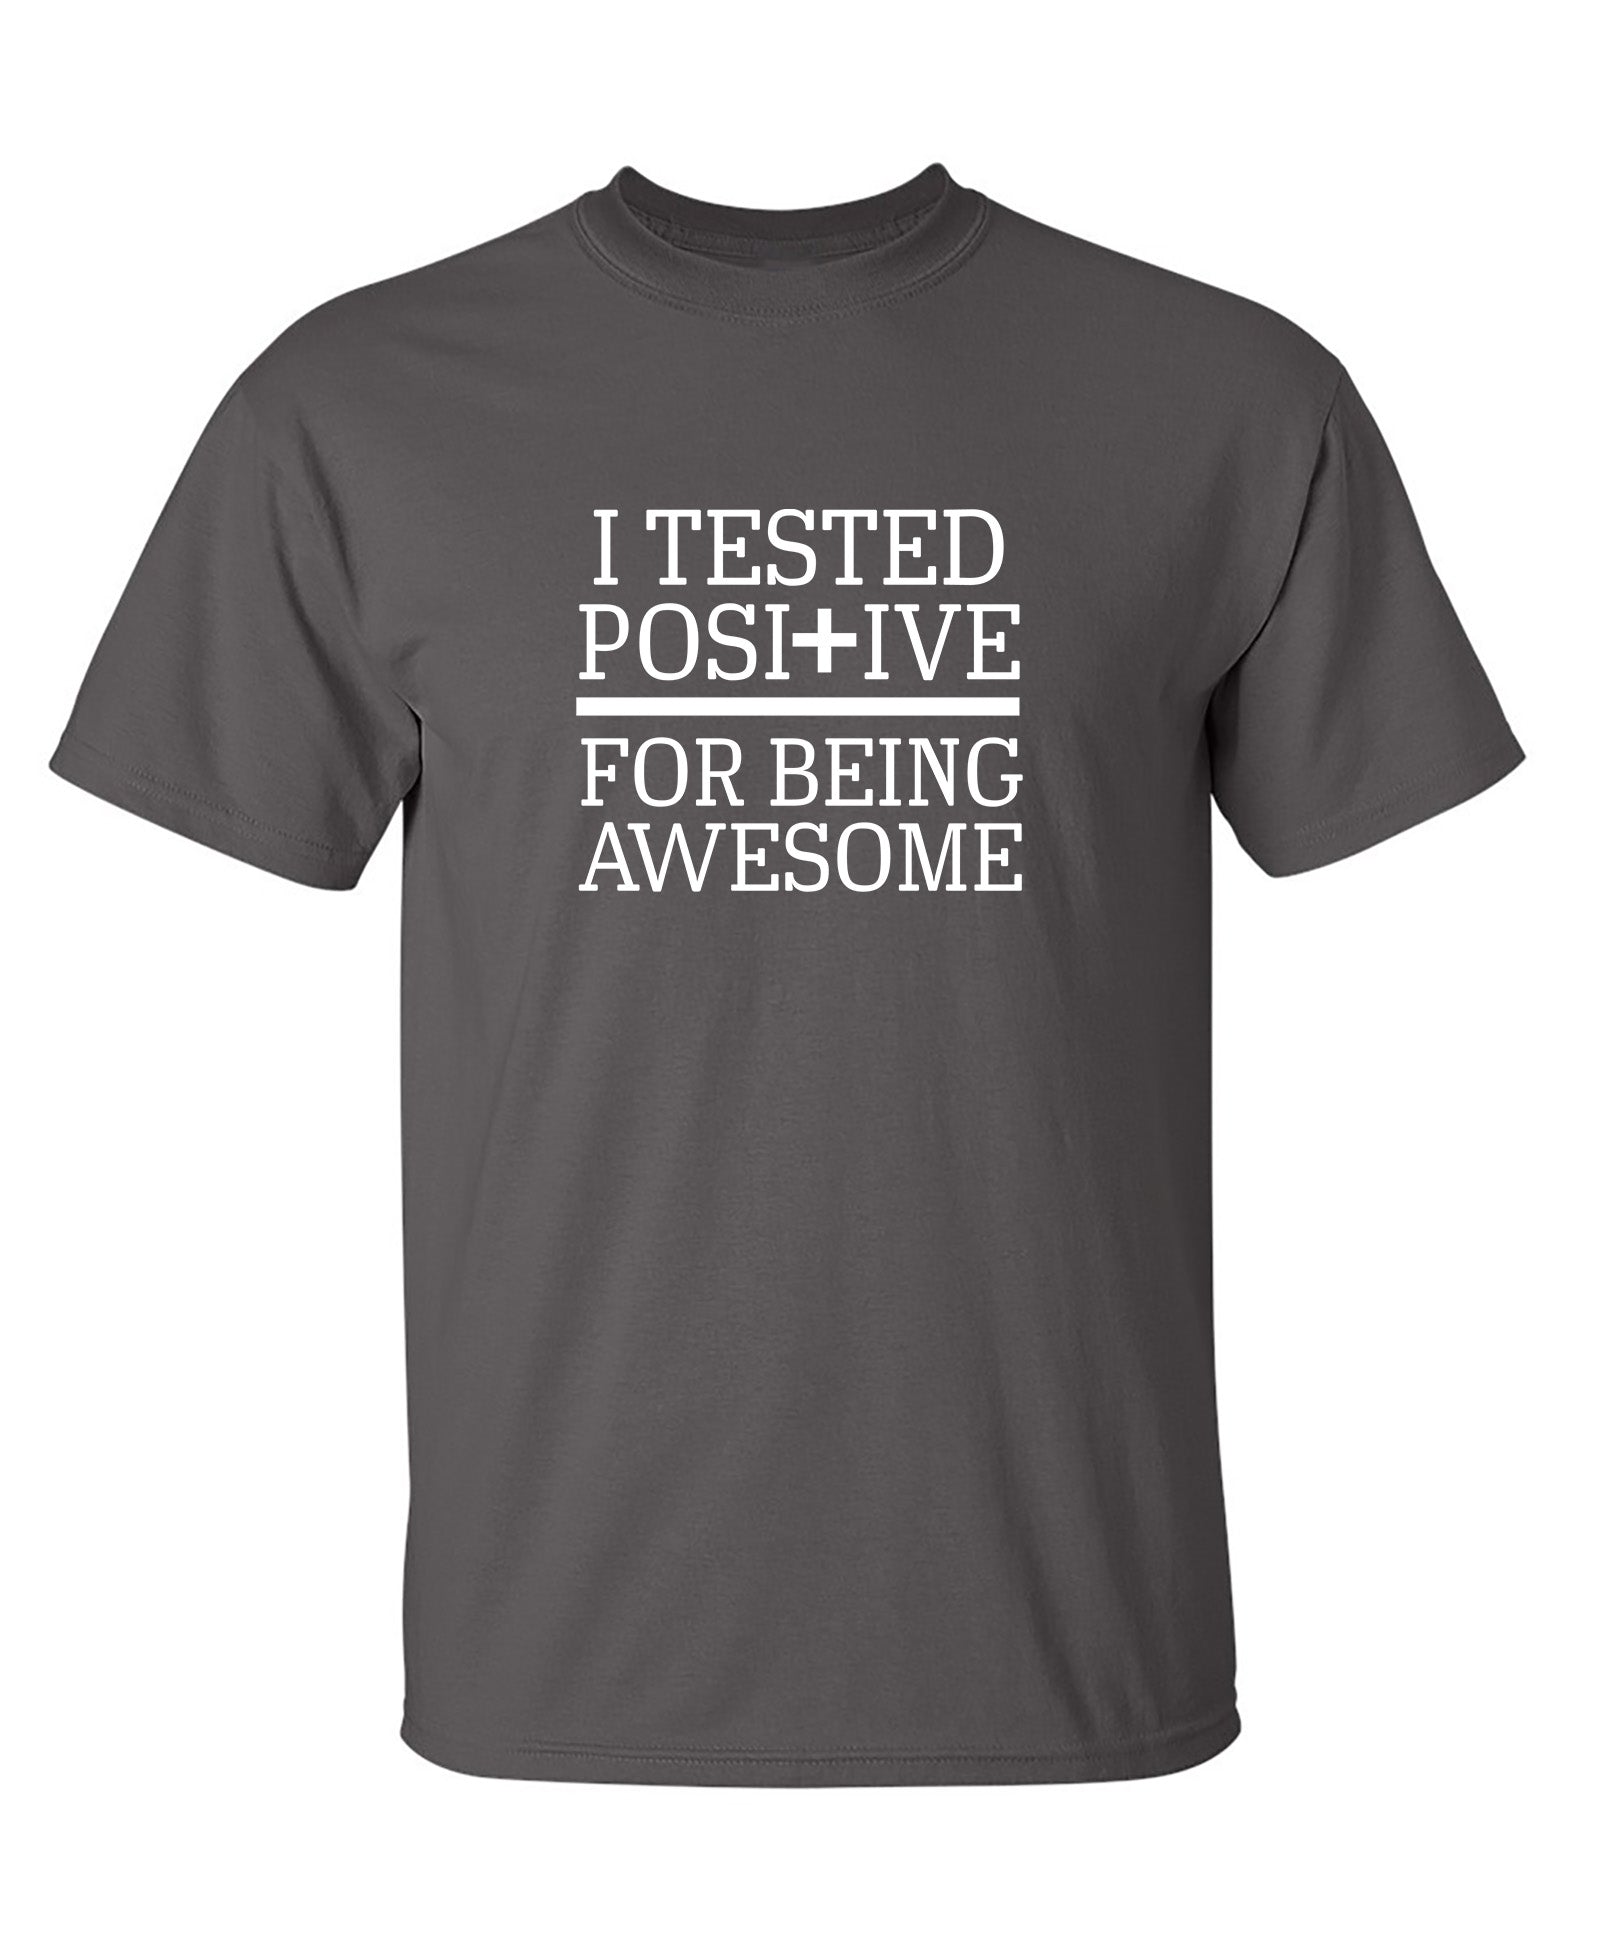 POSITIVE AWESOME - Funny T Shirts & Graphic Tees